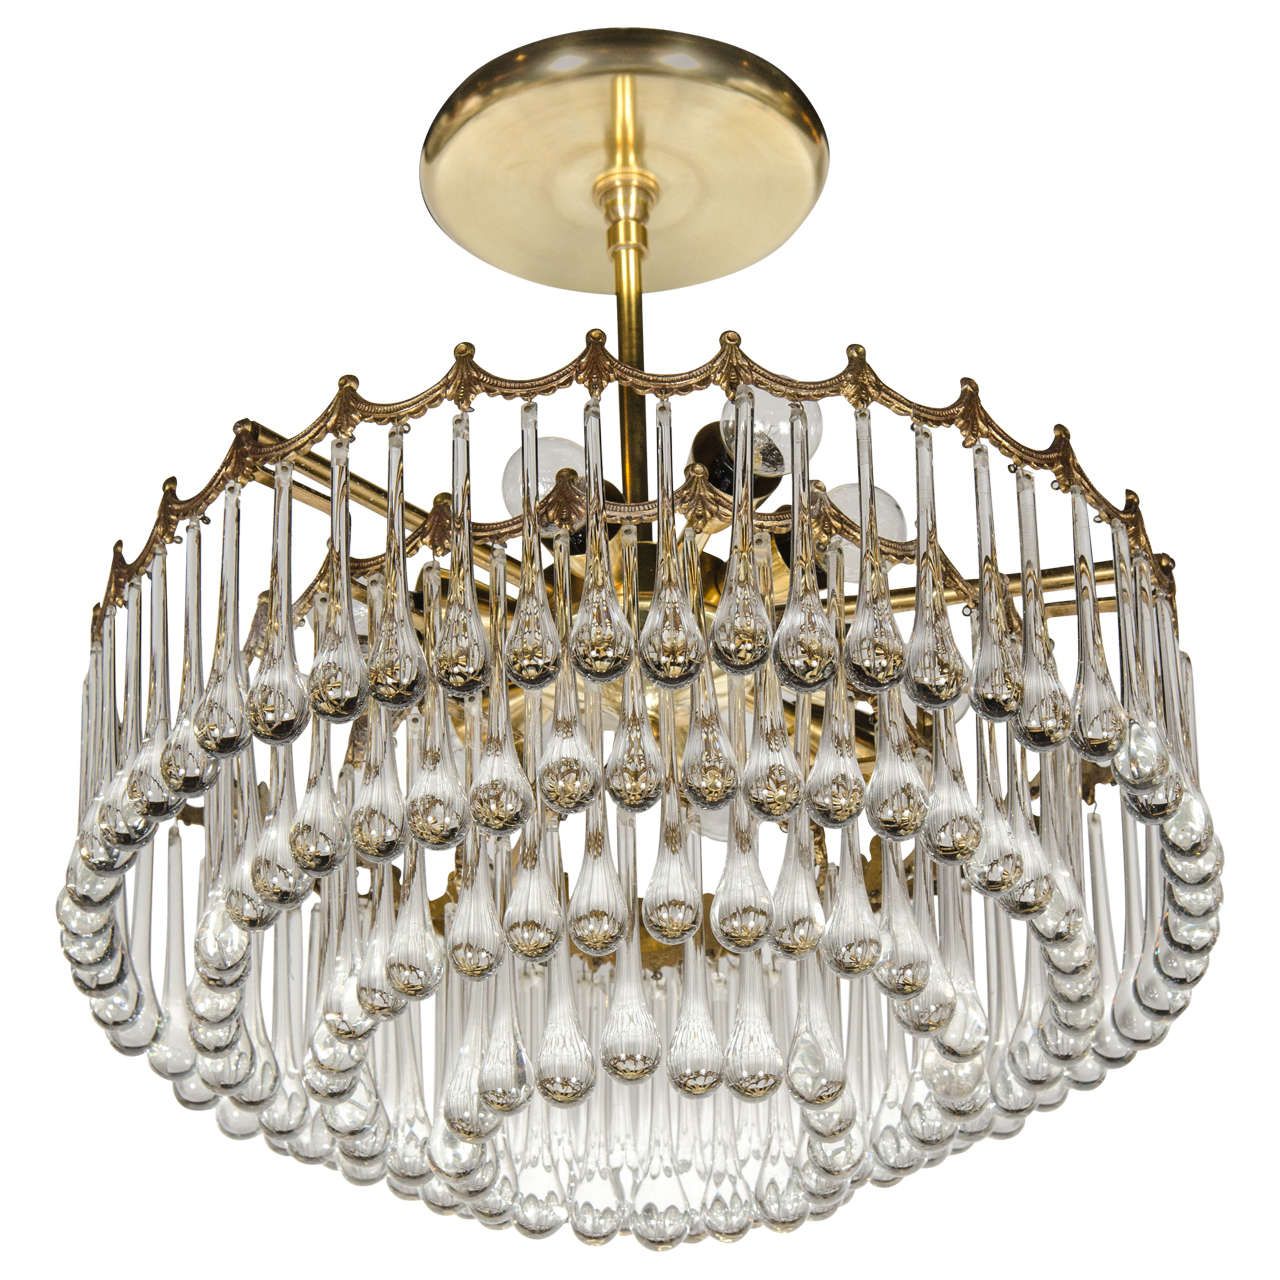 Widely Used Brass Four Light Chandeliers Throughout 1940s Hollywood Four Tier Teardrop Chandelier With Brass (View 14 of 21)